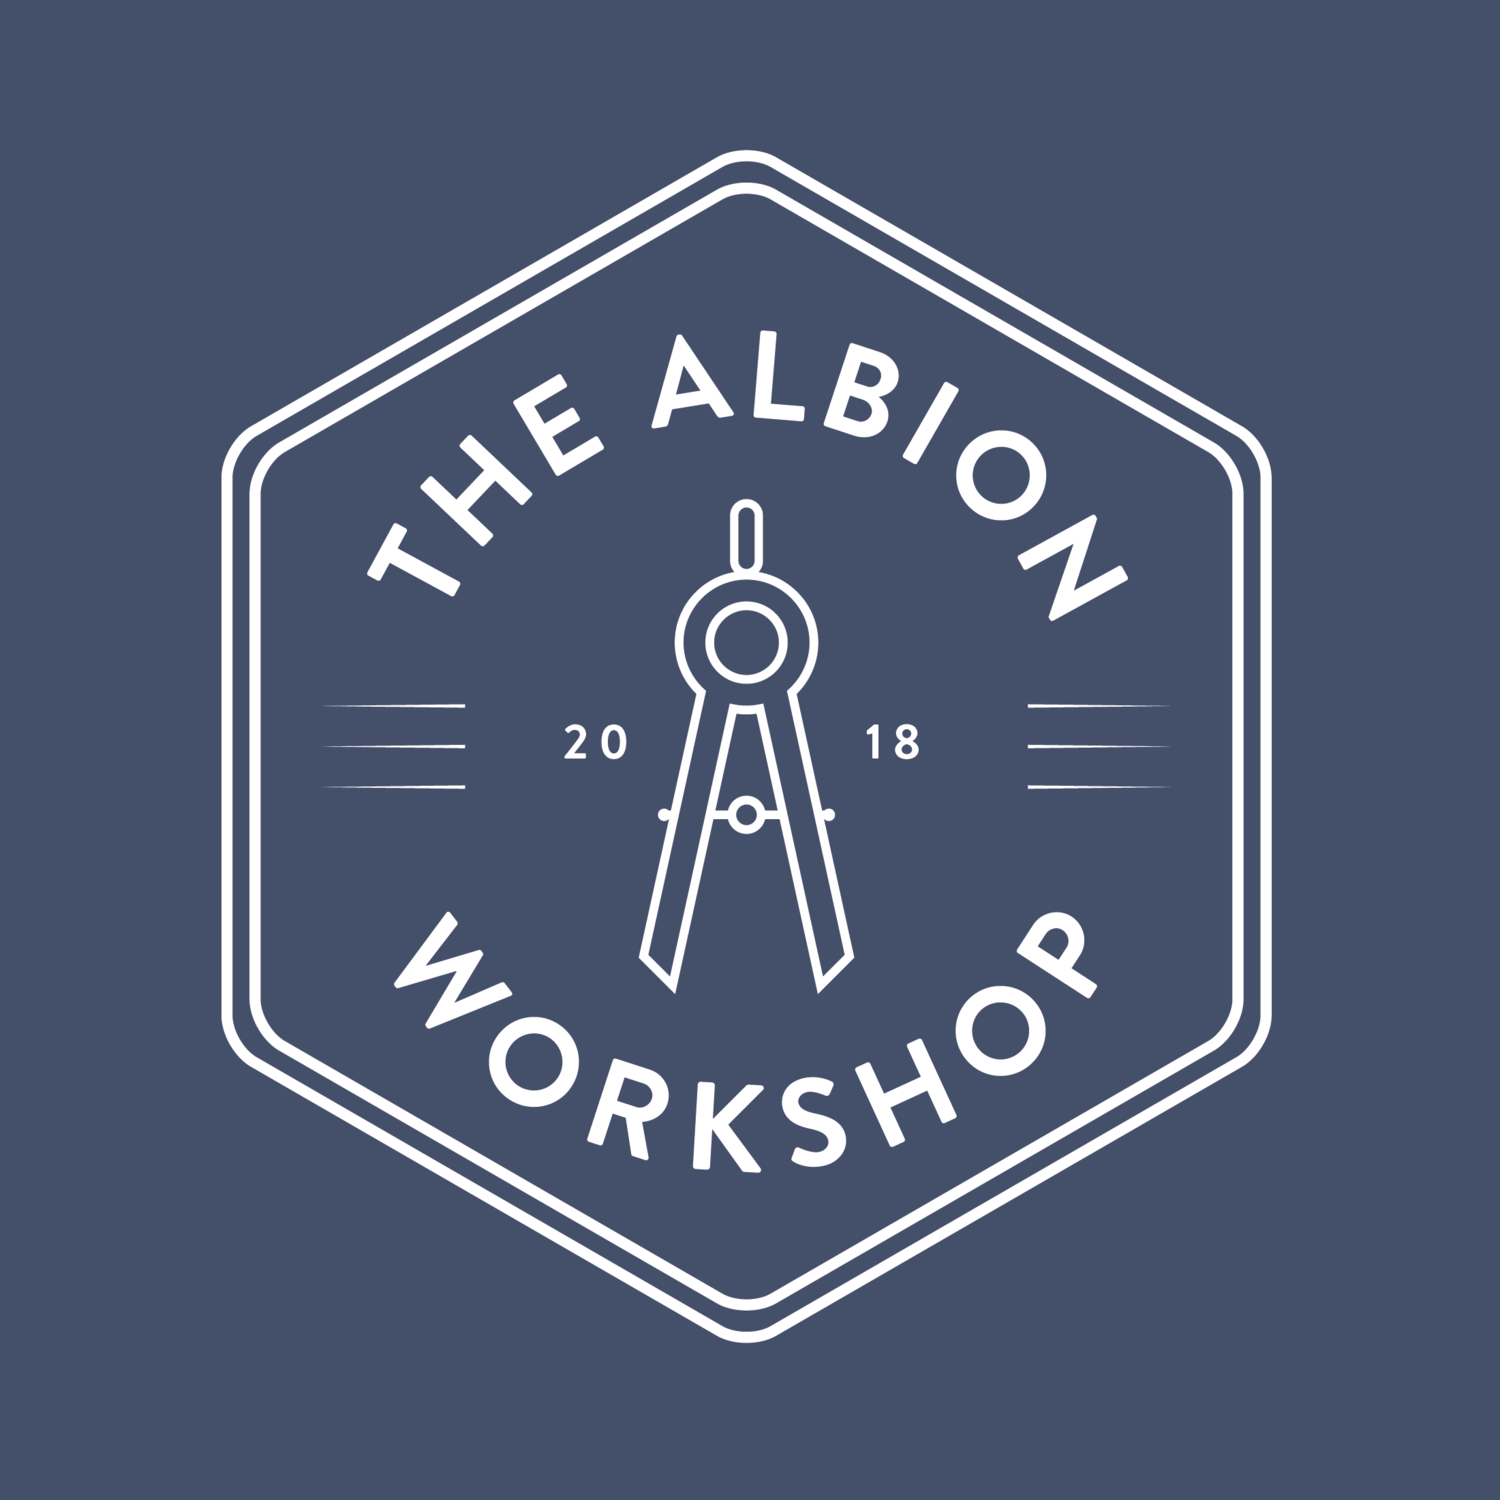 Wood Workshop Plymouth | The Albion Workshop CIC